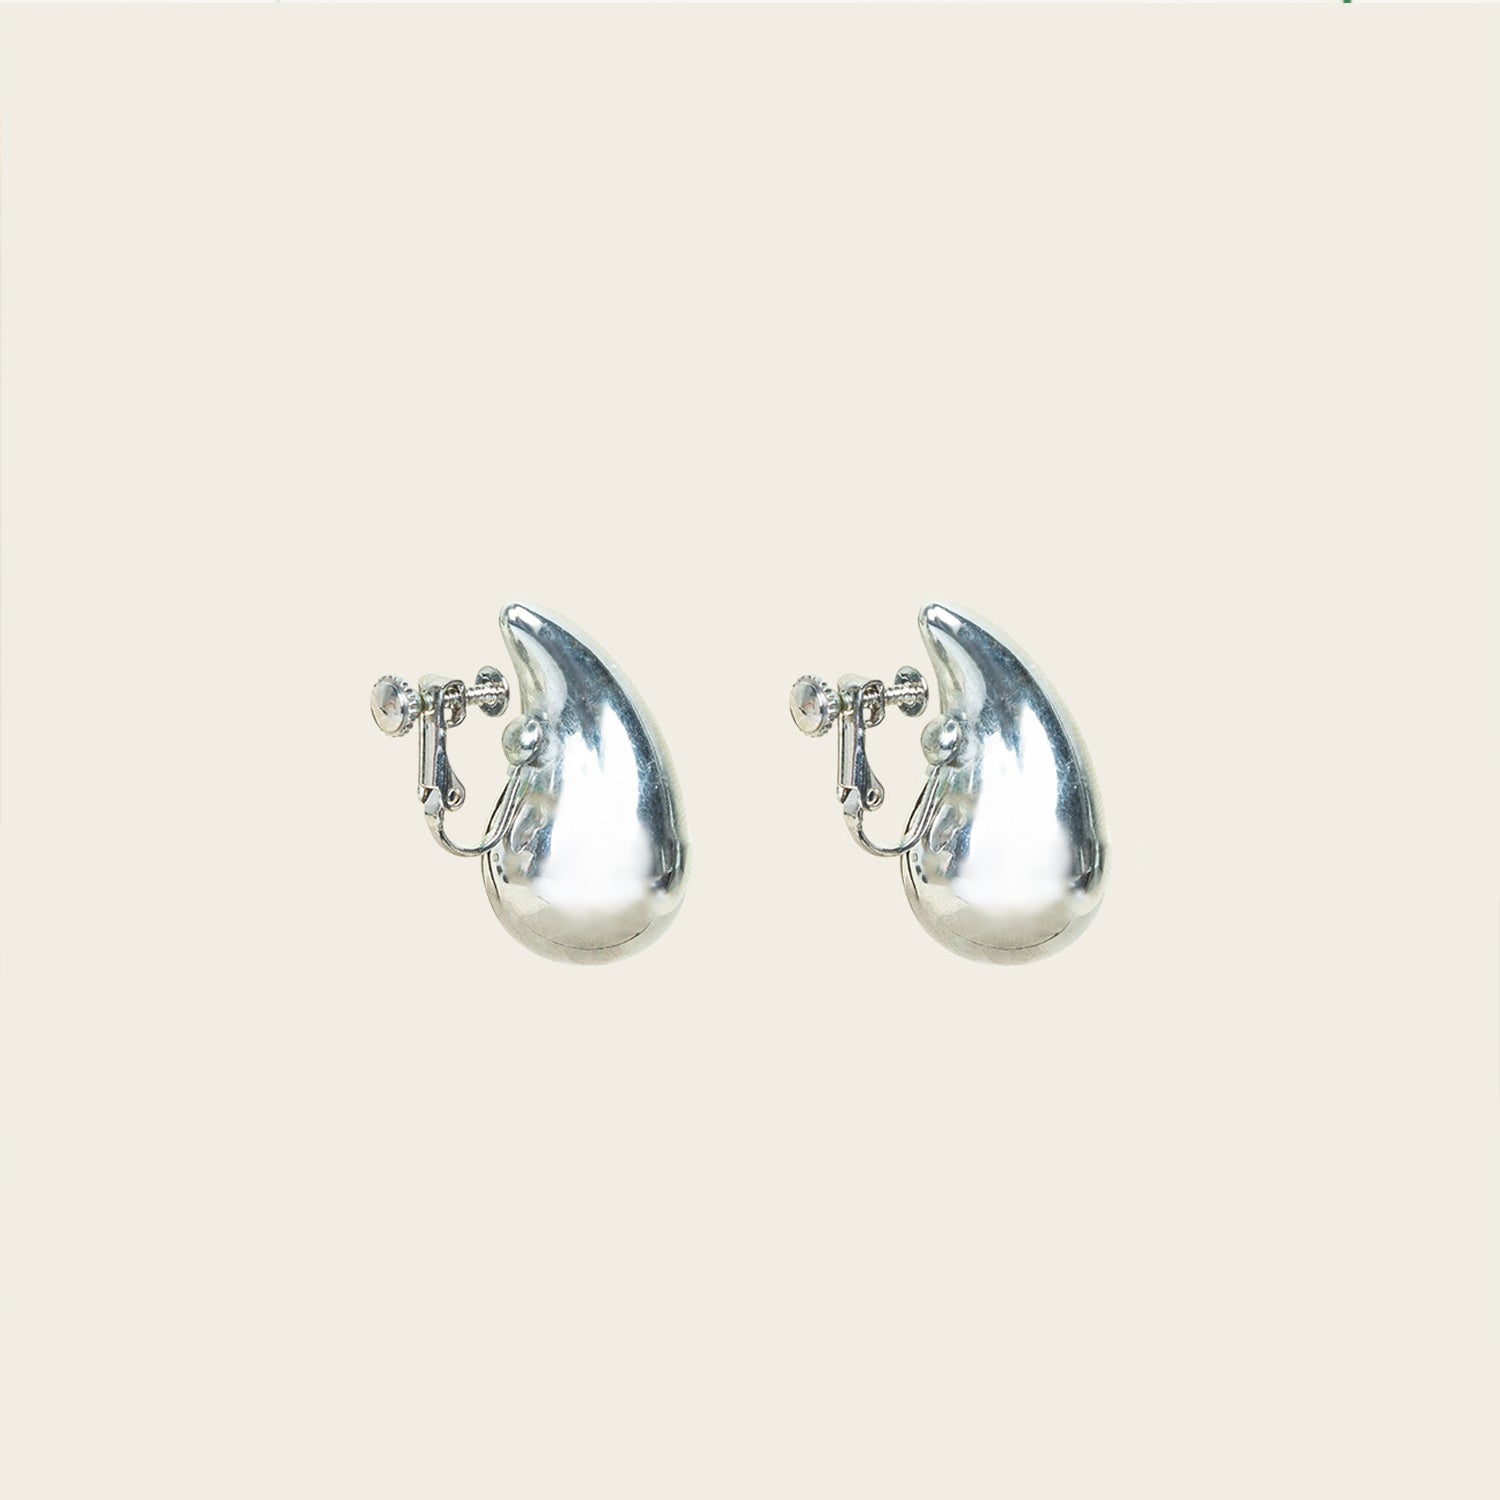 Image of the Isla Clip On Earrings in Silver feature a screwback closure that makes them suitable for all ear types, providing a secure hold for up to 12 hours. Easily adjustable, these earrings are constructed with a silver toned copper alloy. Please note: this item is sold as one pair.